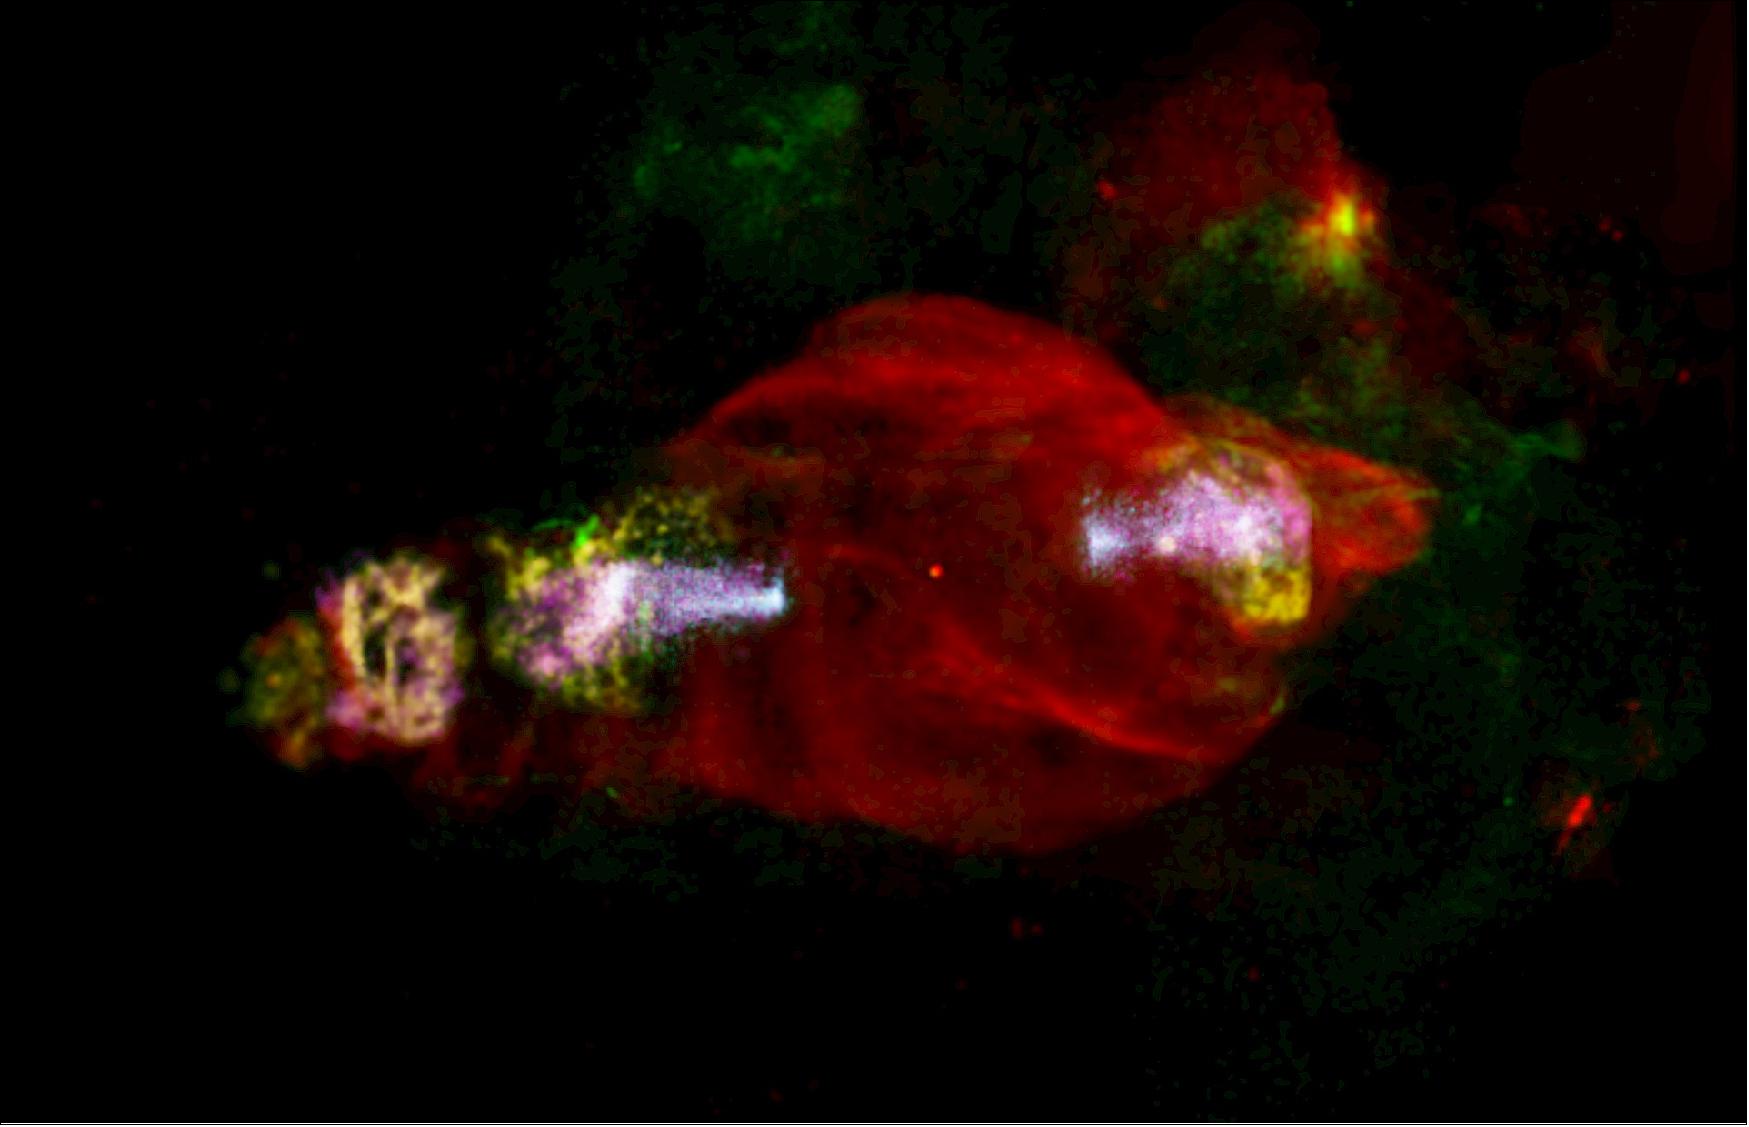 Figure 16: Multi-wavelength image of the W50 nebula. Red: Radio (Dubner et al. 1998), Green: Optical (Boumis et al. 2007), Yellow: Soft X-rays (0.5–1 keV), Magenta: Medium energy X-rays (1–2 keV), Cyan: Hard X-ray emission (2–12 keV). The eastern lobe X-ray image highlights the XMM-Newton data presented in this work (with the brightening at the edge of the field of view cropped here to highlight the source emission). The western lobe X-ray image shows only partial Chandra coverage of part of the nebula (Moldowan et al. 2005); additional X-ray observations of this and other regions are currently being carried out and will be presented in future work [image credit: S. Safi-Harb, et al. (2022)]